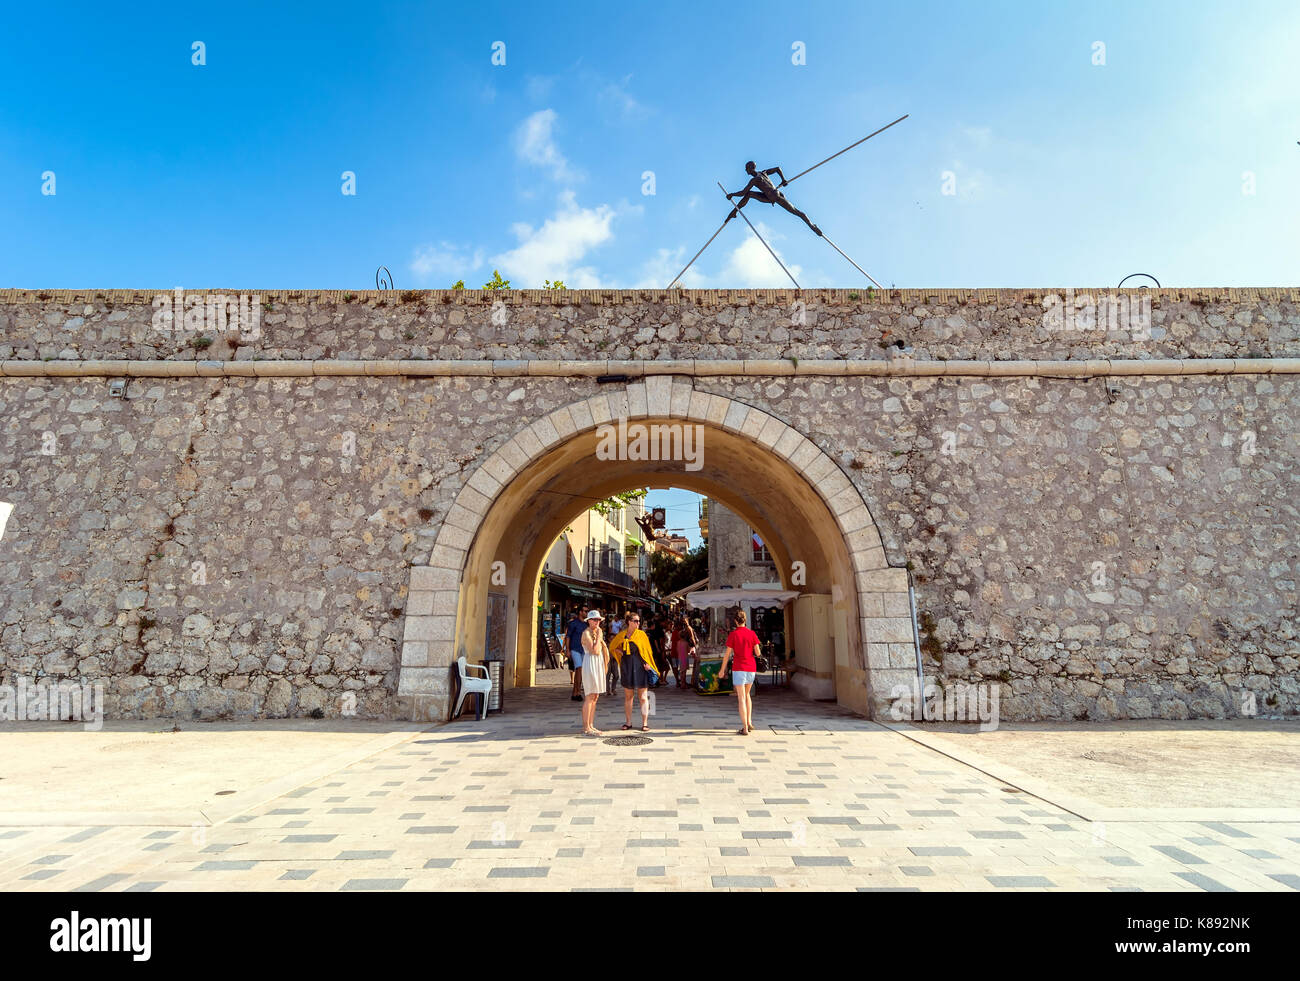 Antibes, France - July 01, 2016: Modern art sculptures on the Pre-des-Pecheurs esplanade and historic wall in old town. The area was renovated in 2014 Stock Photo